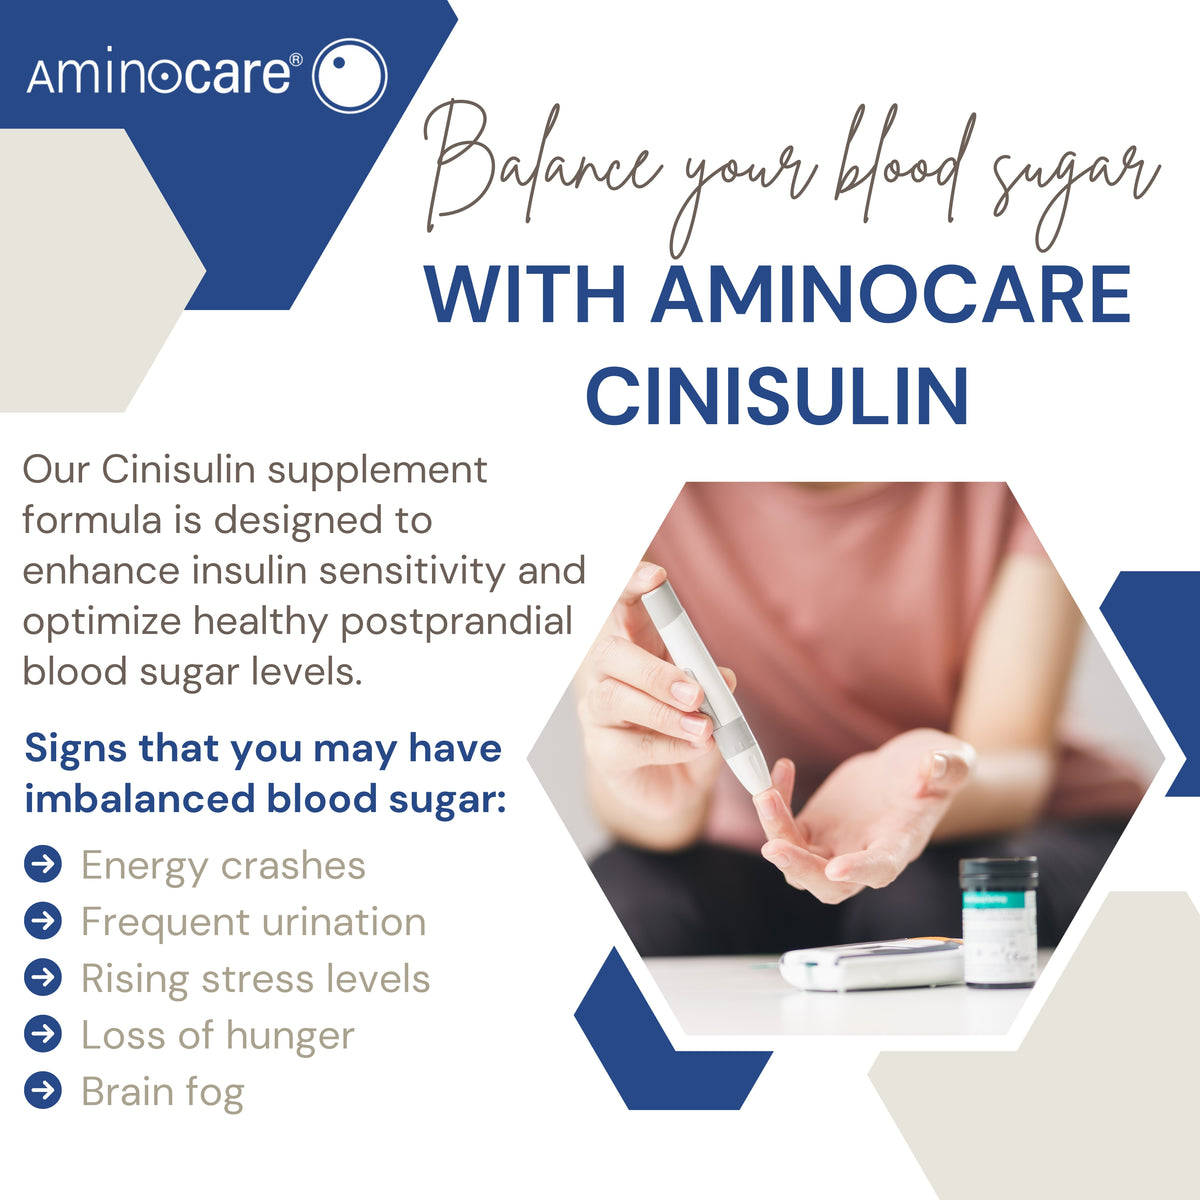 Signs of Imbalanced Blood Sugar and The Solution of Aminocare® Cinisulin